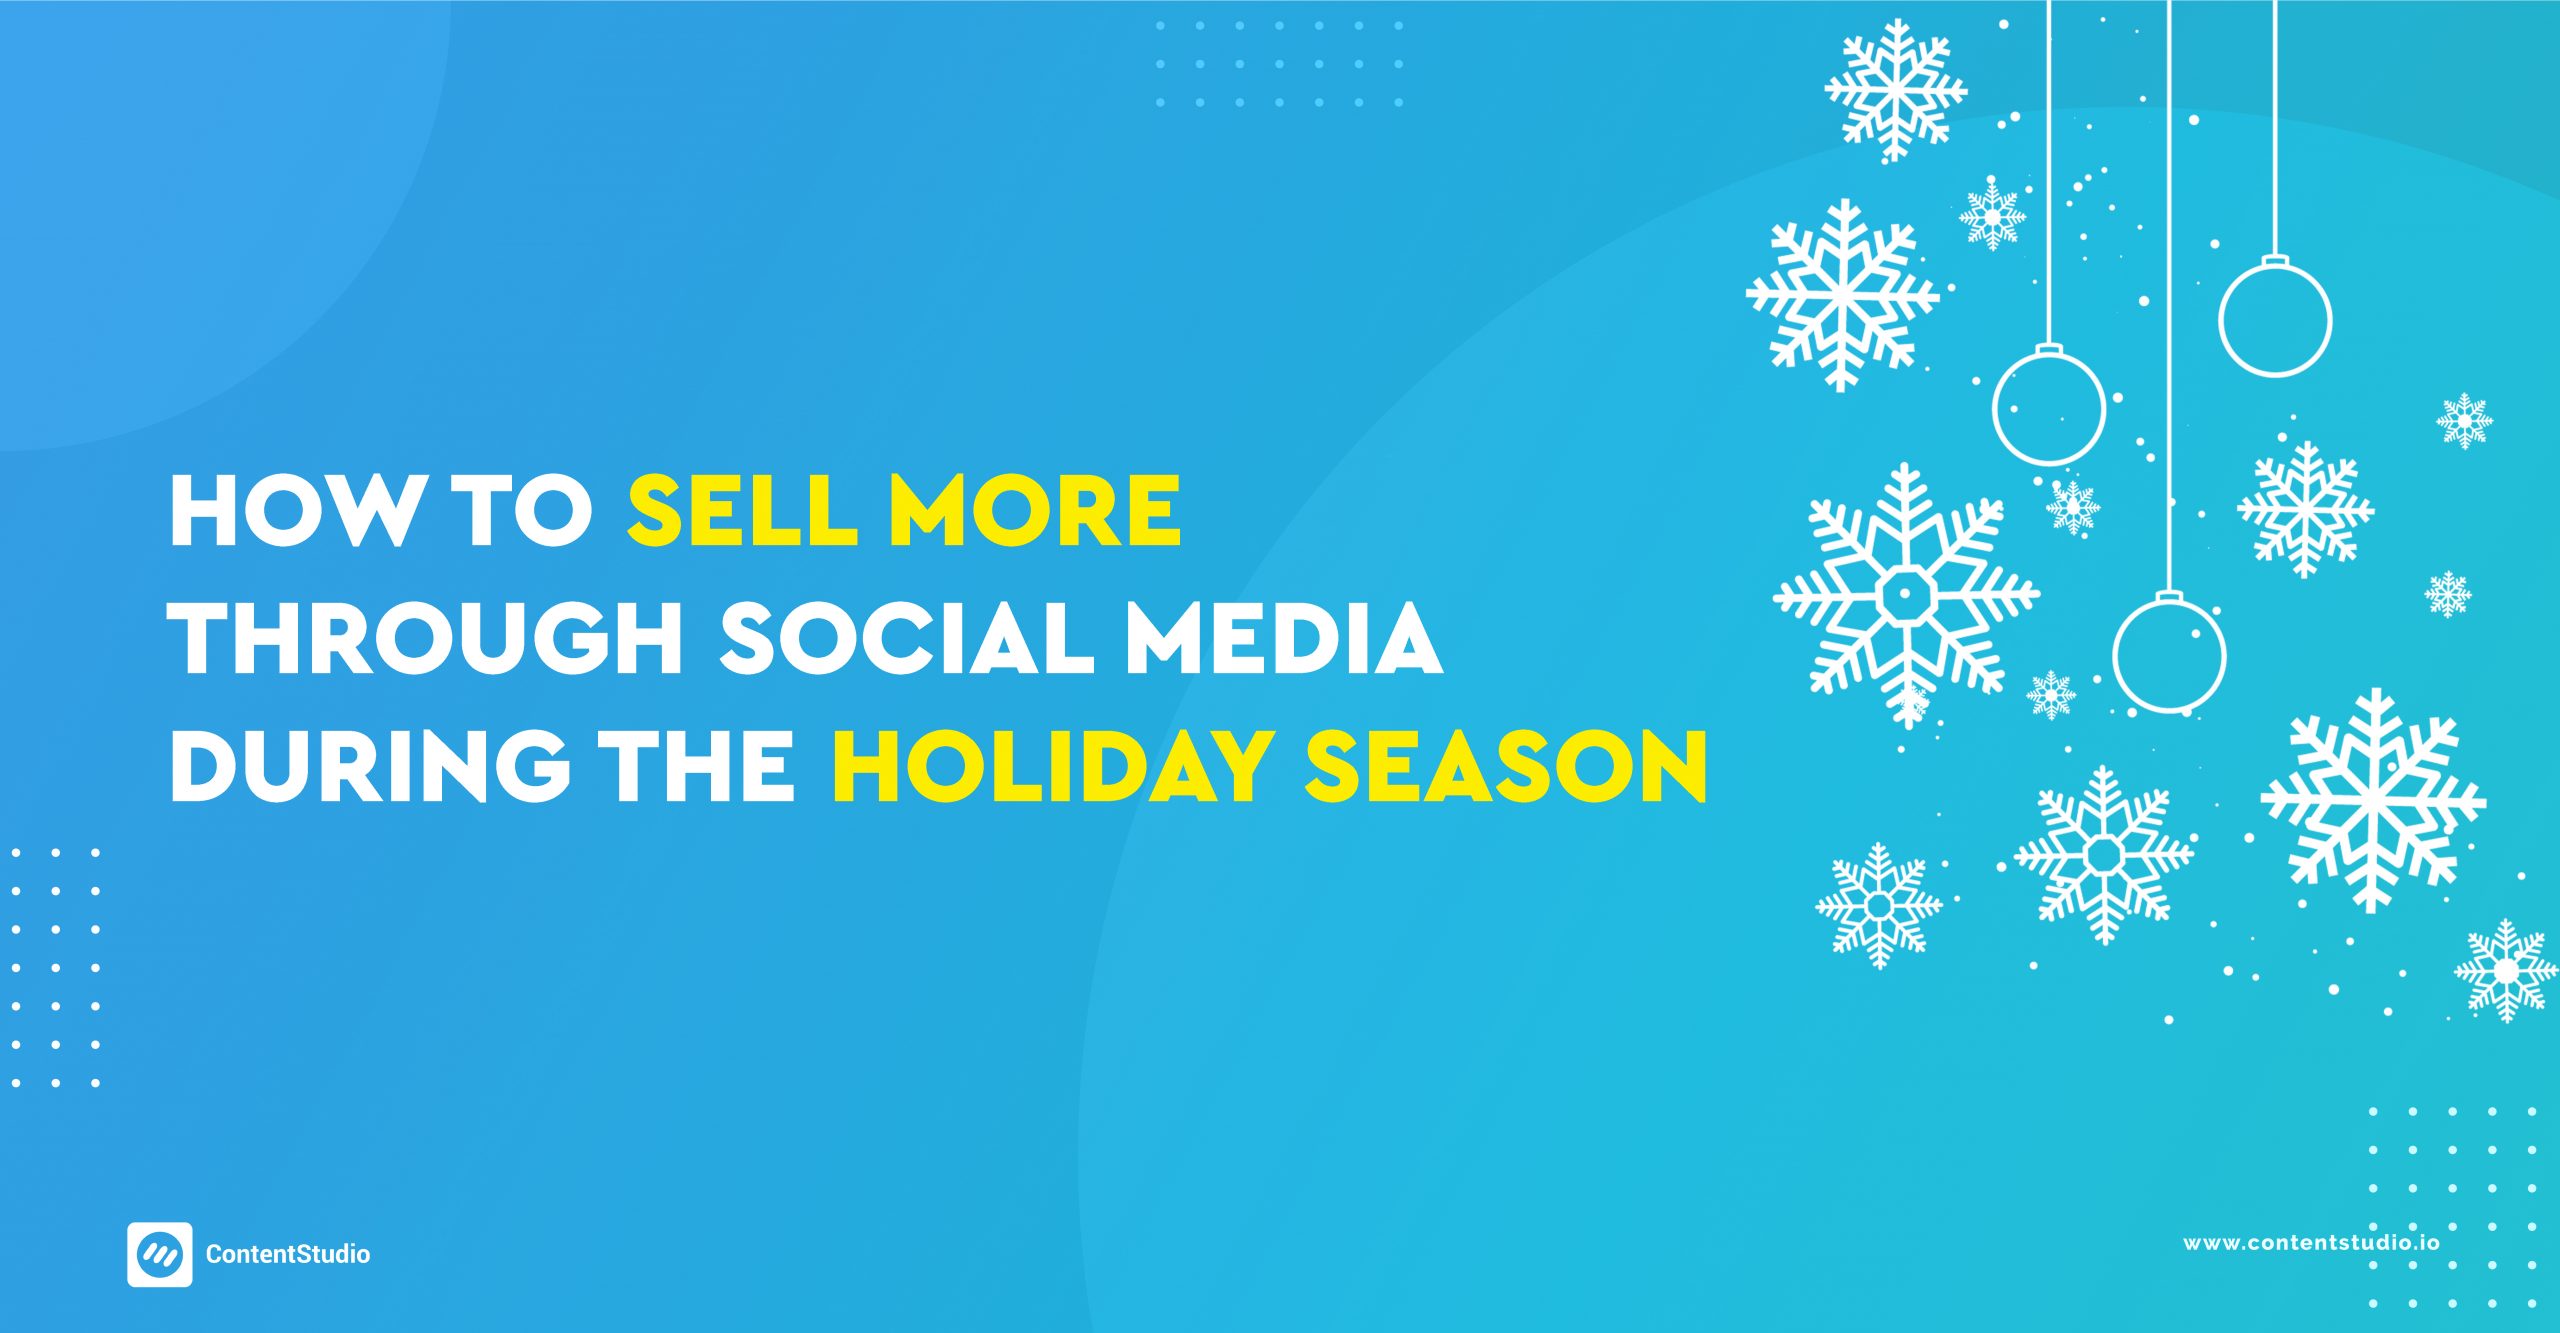 How to sell more on social media in holiday season